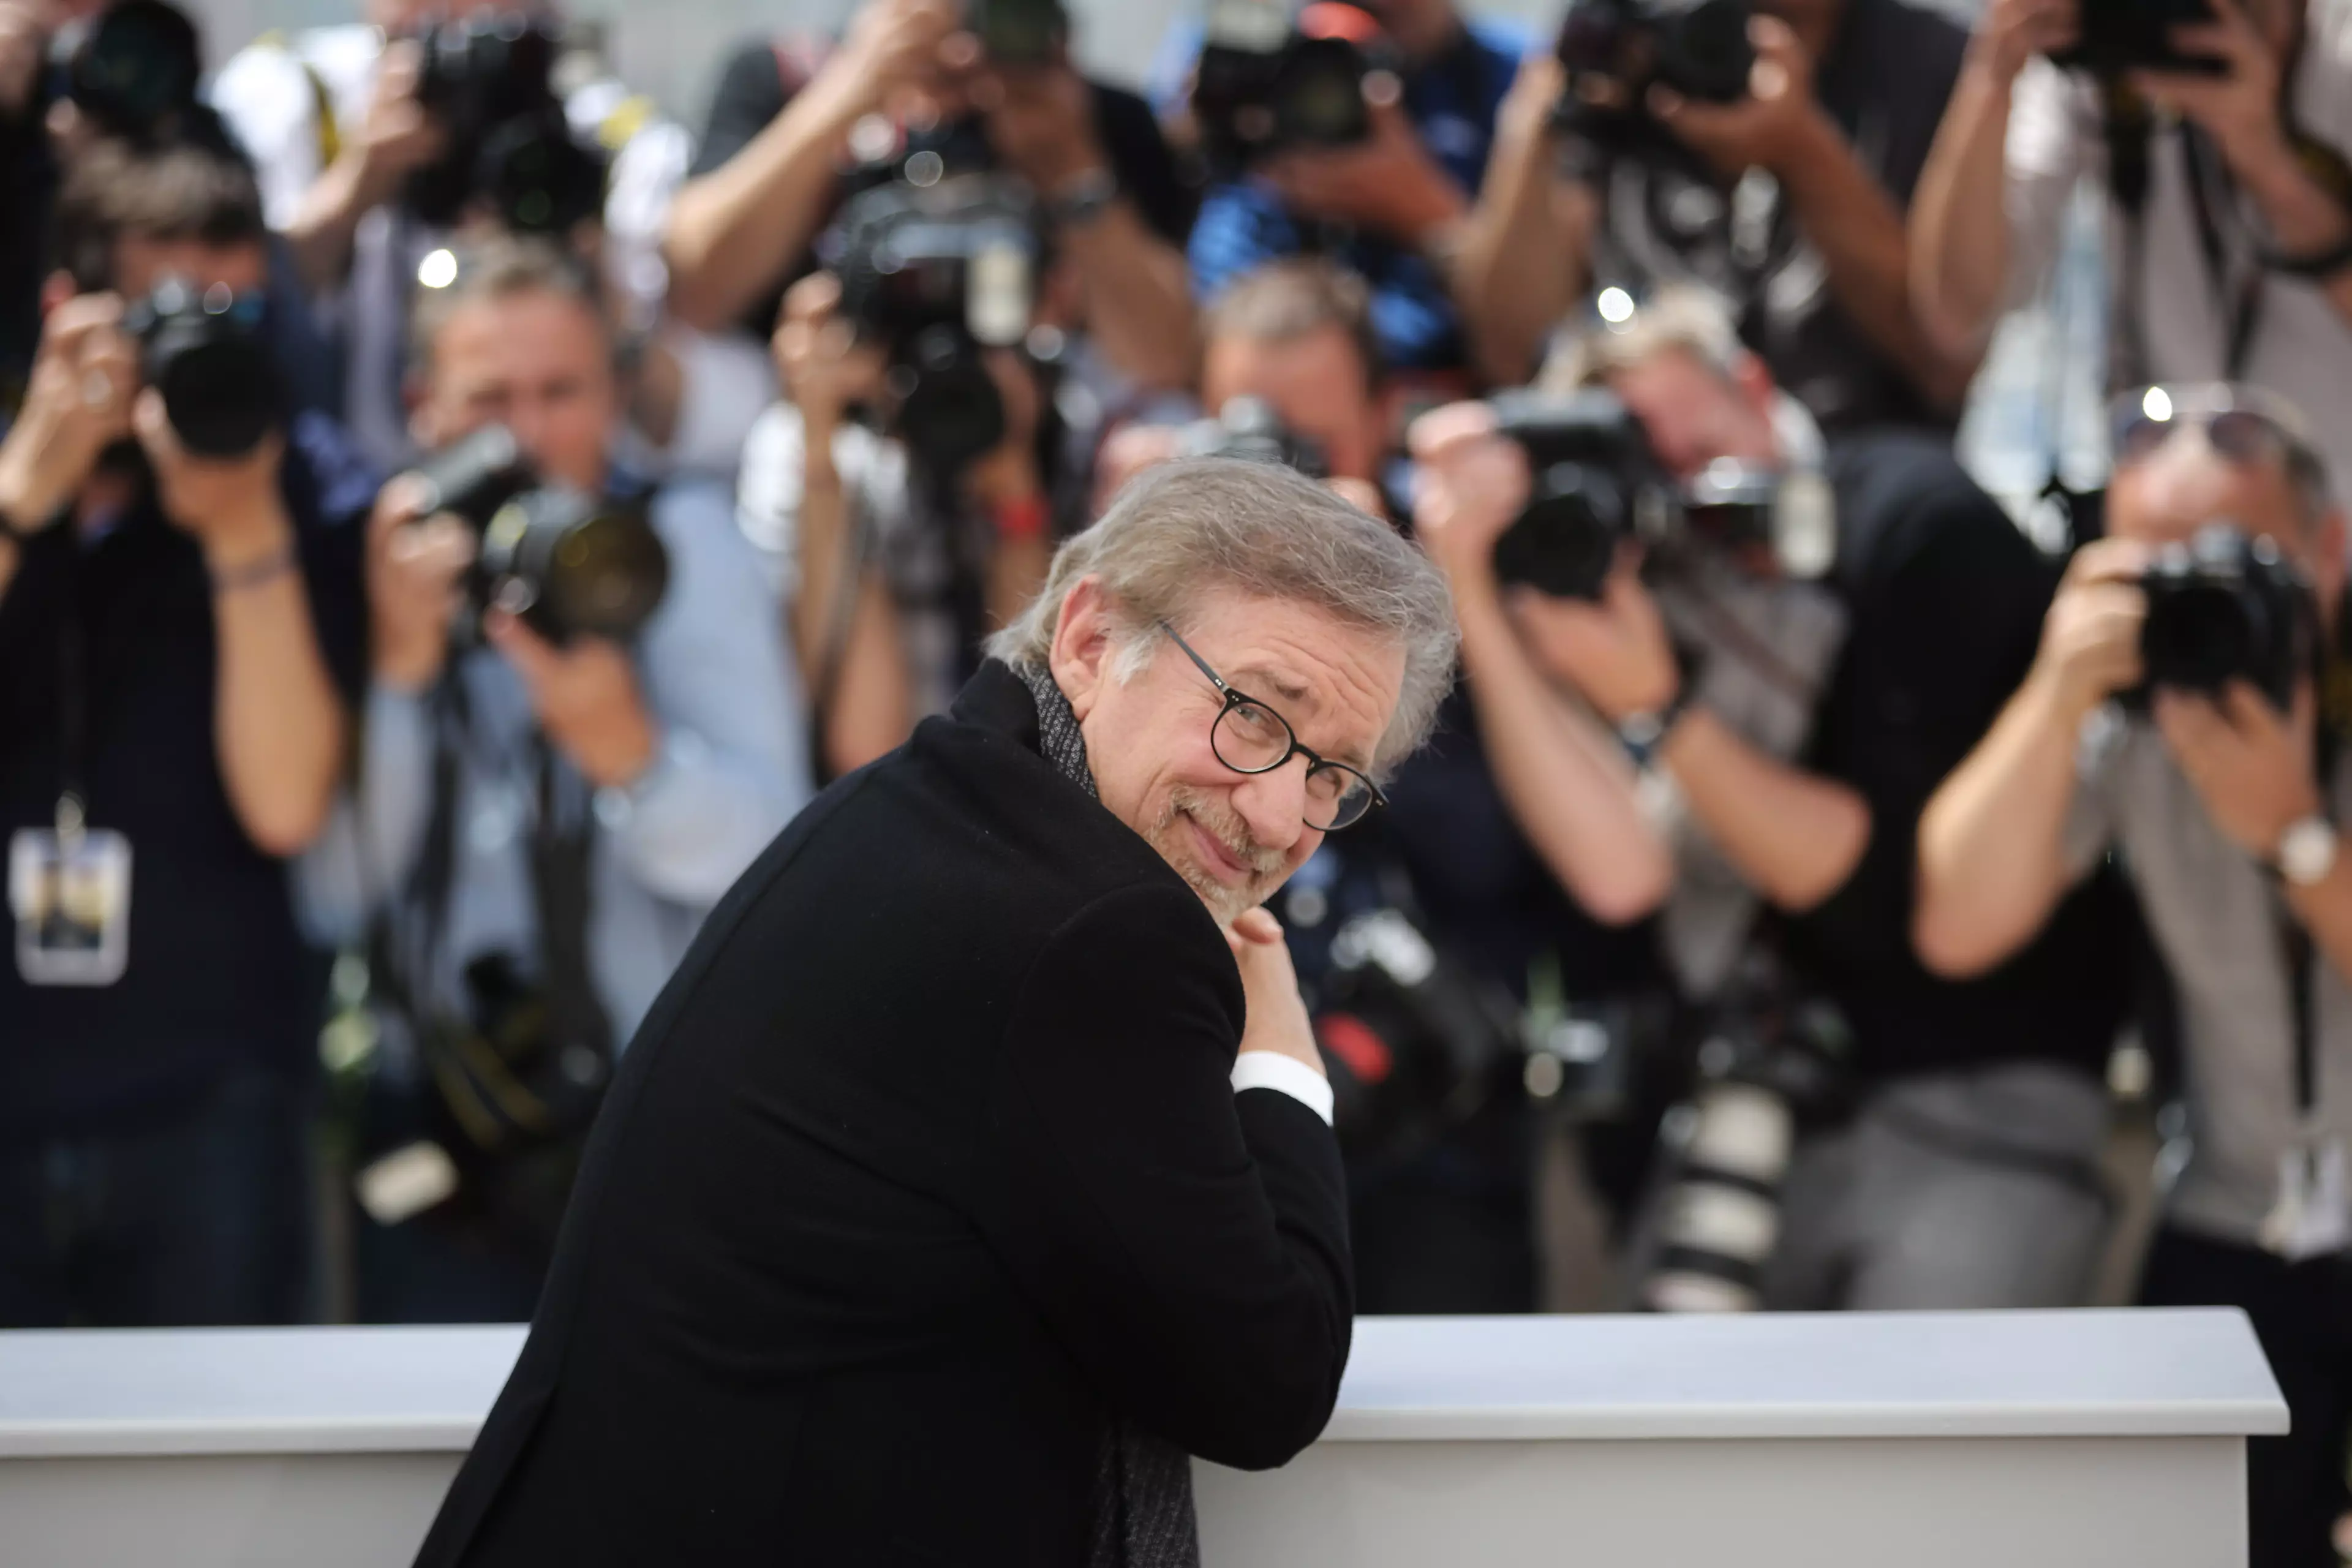 Steven Spielberg Has Arguably The World’s Most Impressive C.V.